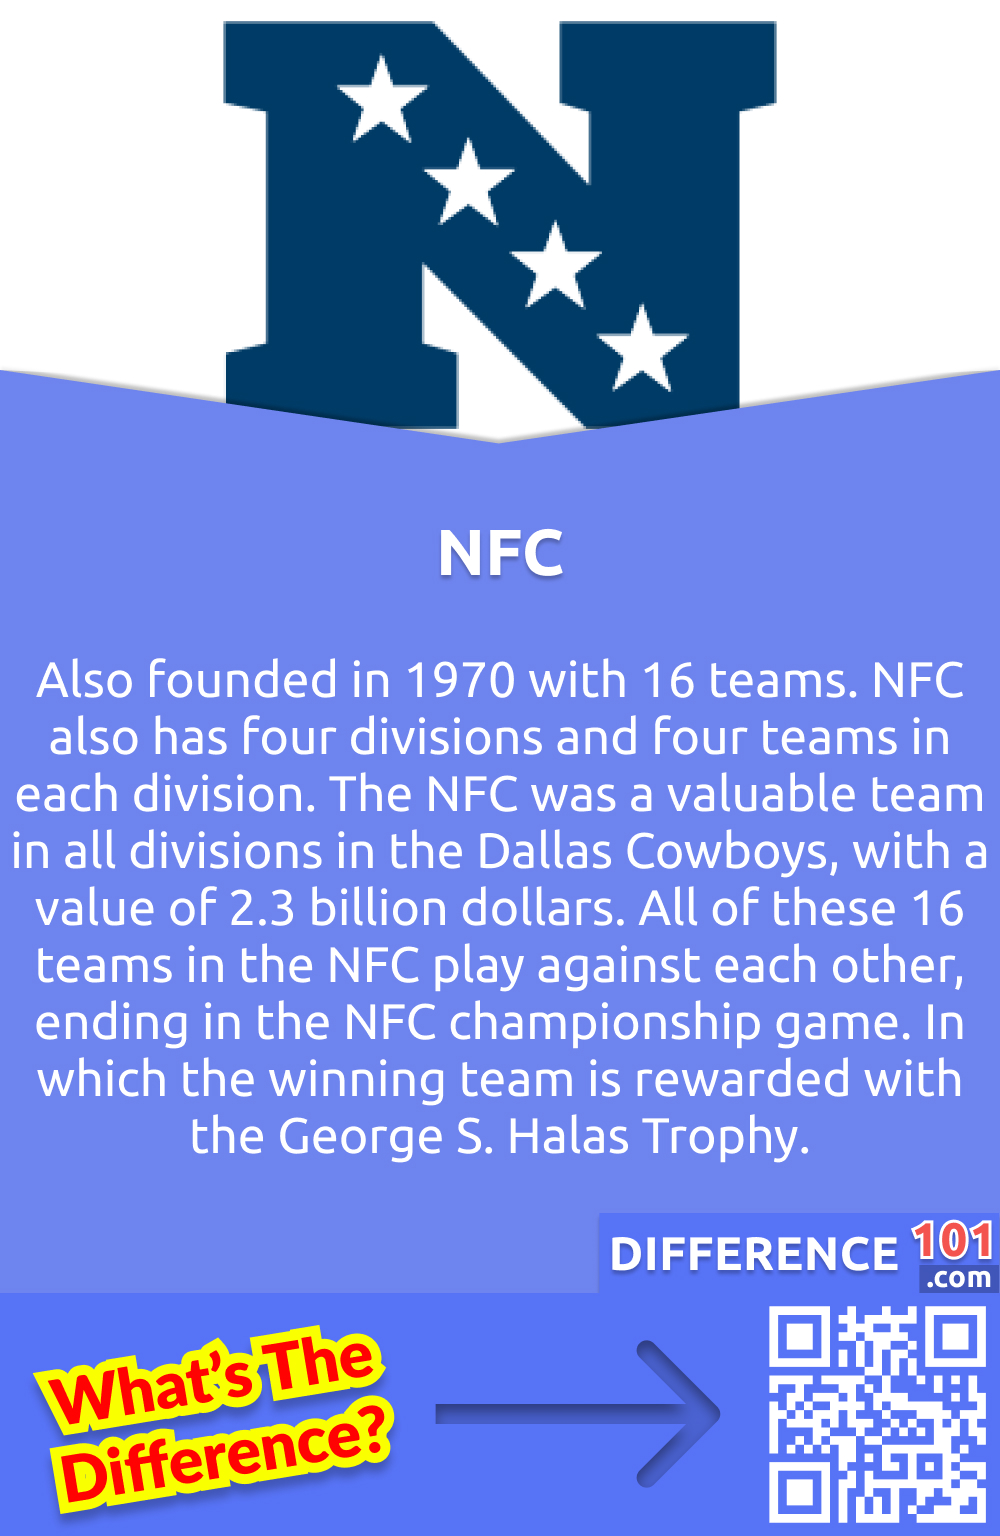 What Is NFC? Also founded in 1970 with 16 teams. NFC also has four divisions and four teams in each division. The NFC was a valuable team in all divisions in the Dallas Cowboys, with a value of 2.3 billion dollars. All of these 16 teams in the NFC play against each other, ending in the NFC championship game. In which the winning team is rewarded with the George S. Halas Trophy.